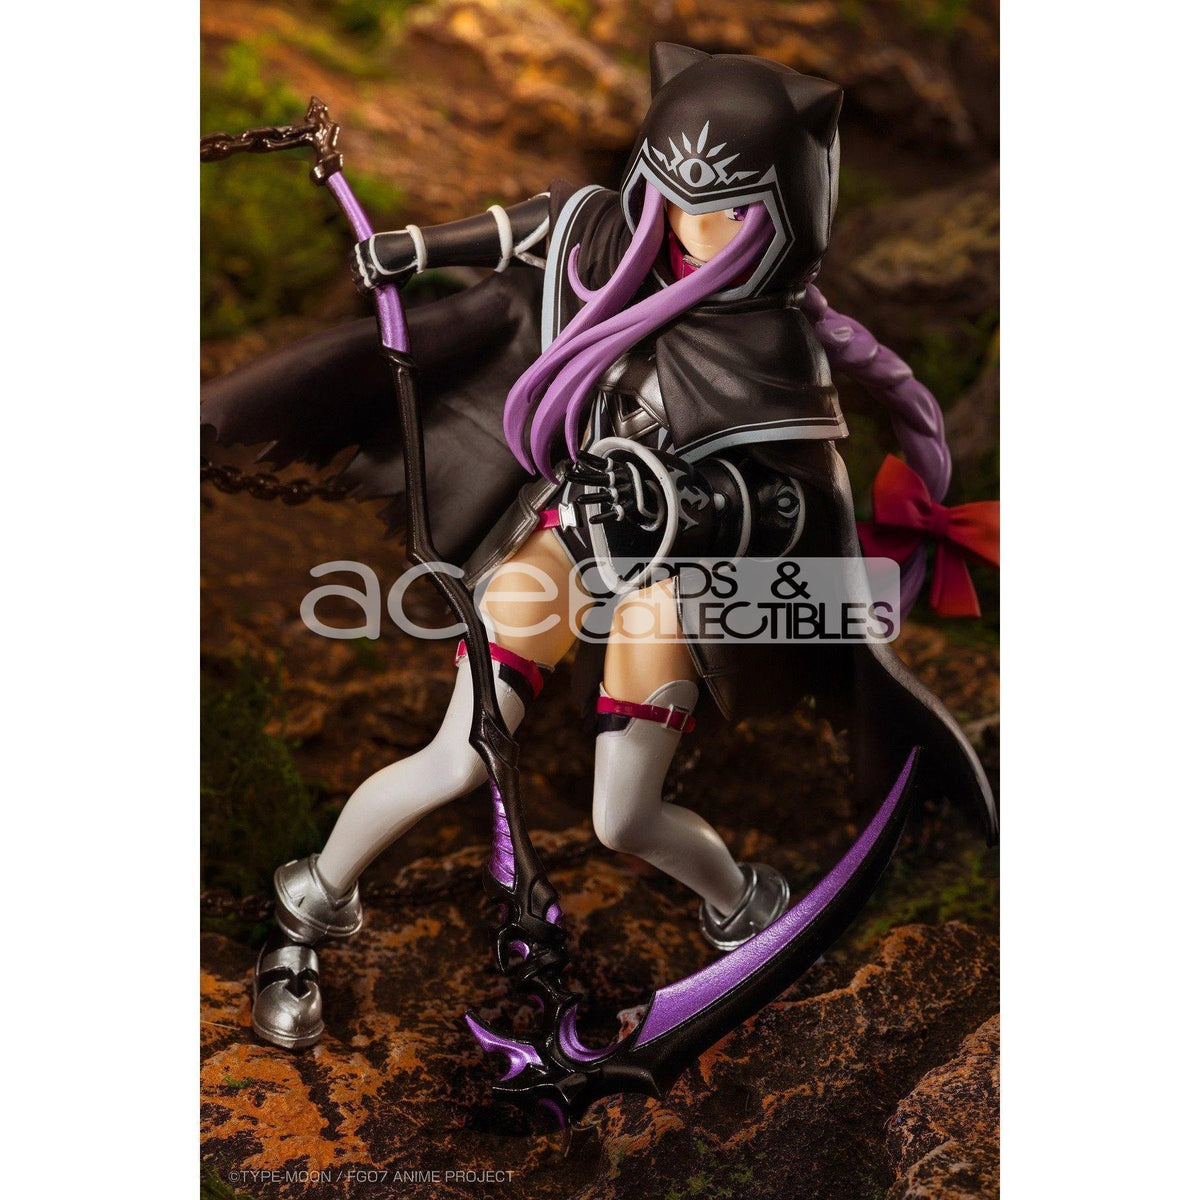 Ichiban Kuji Fate/Grand Order -Absolute Demonic Front: Babylonia : &quot;Prize B - Ana&quot;-Bandai-Ace Cards &amp; Collectibles